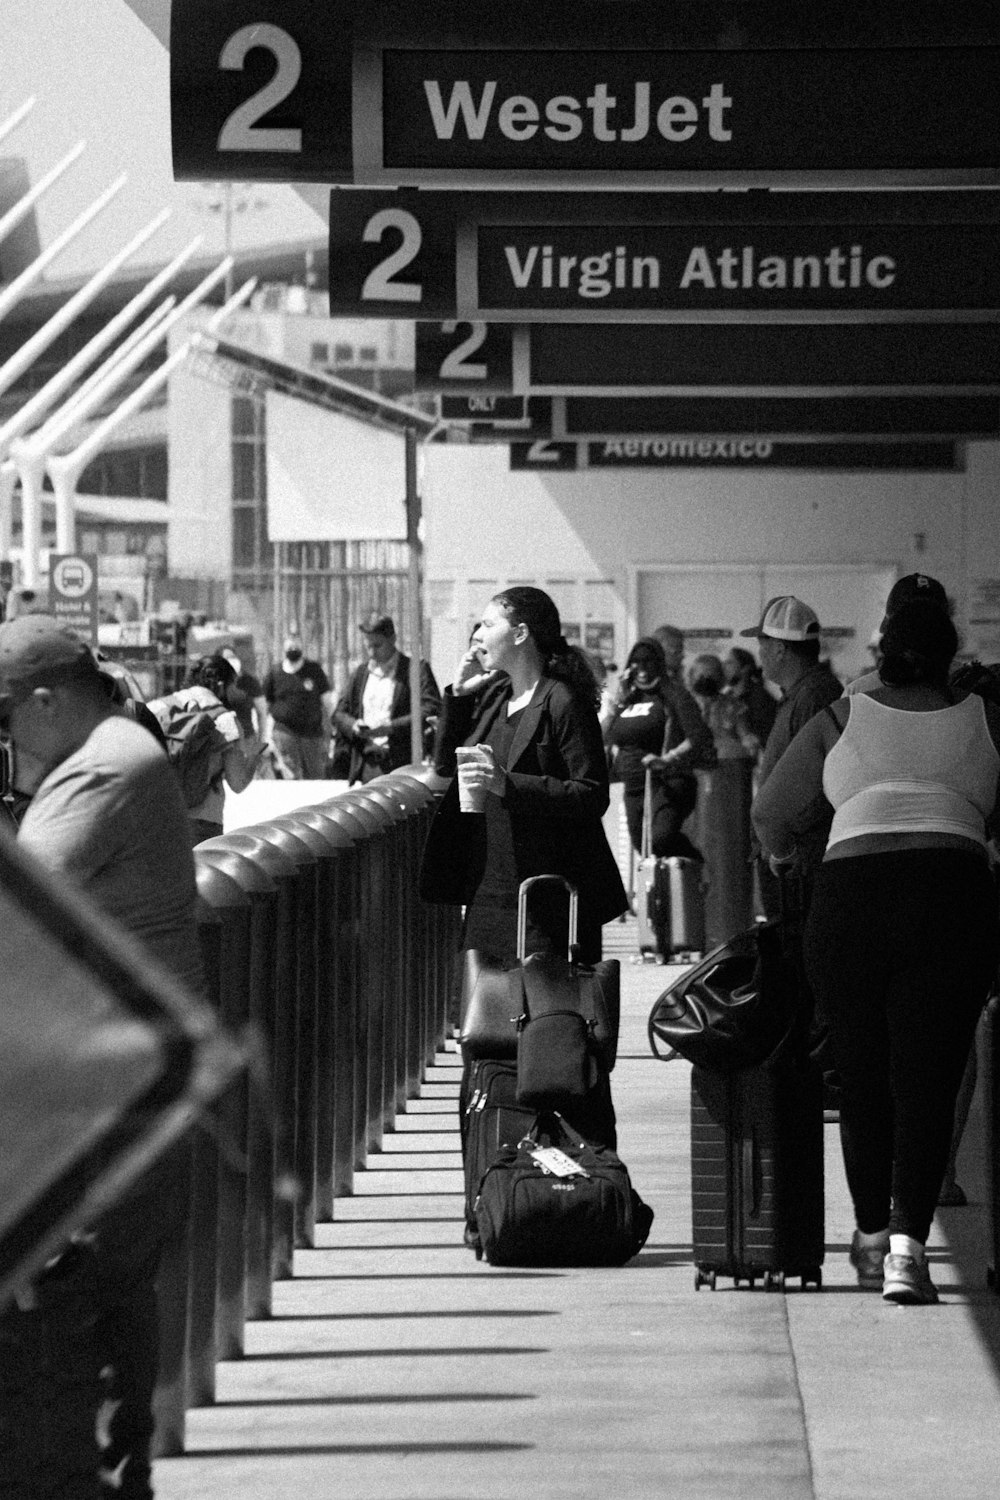 a black and white photo of people waiting at an airport